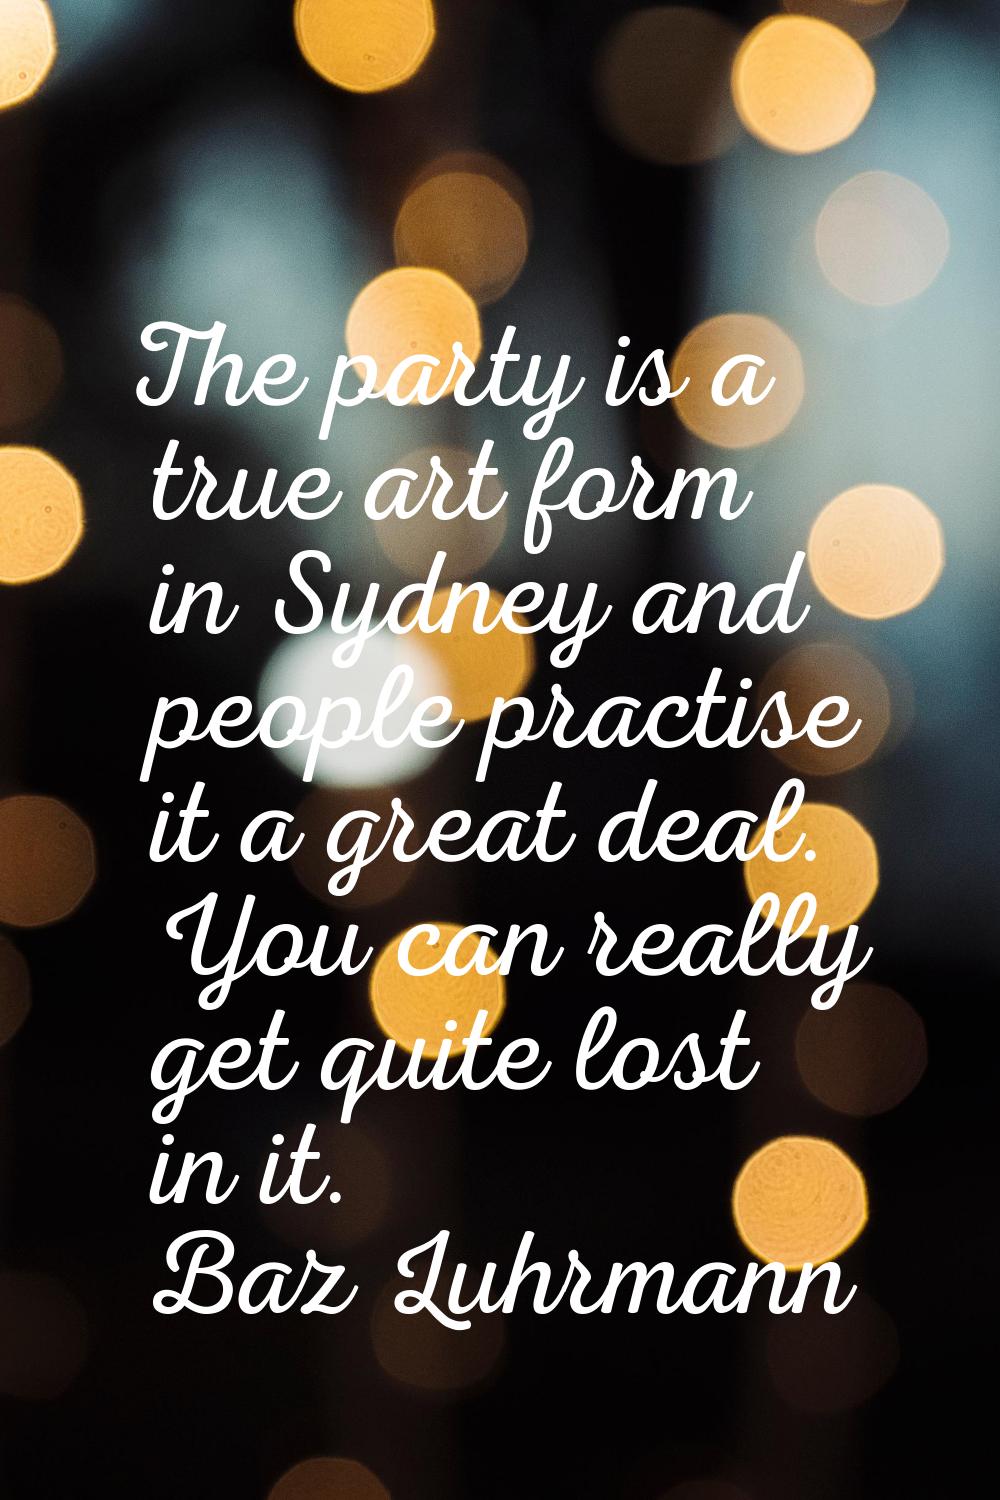 The party is a true art form in Sydney and people practise it a great deal. You can really get quit